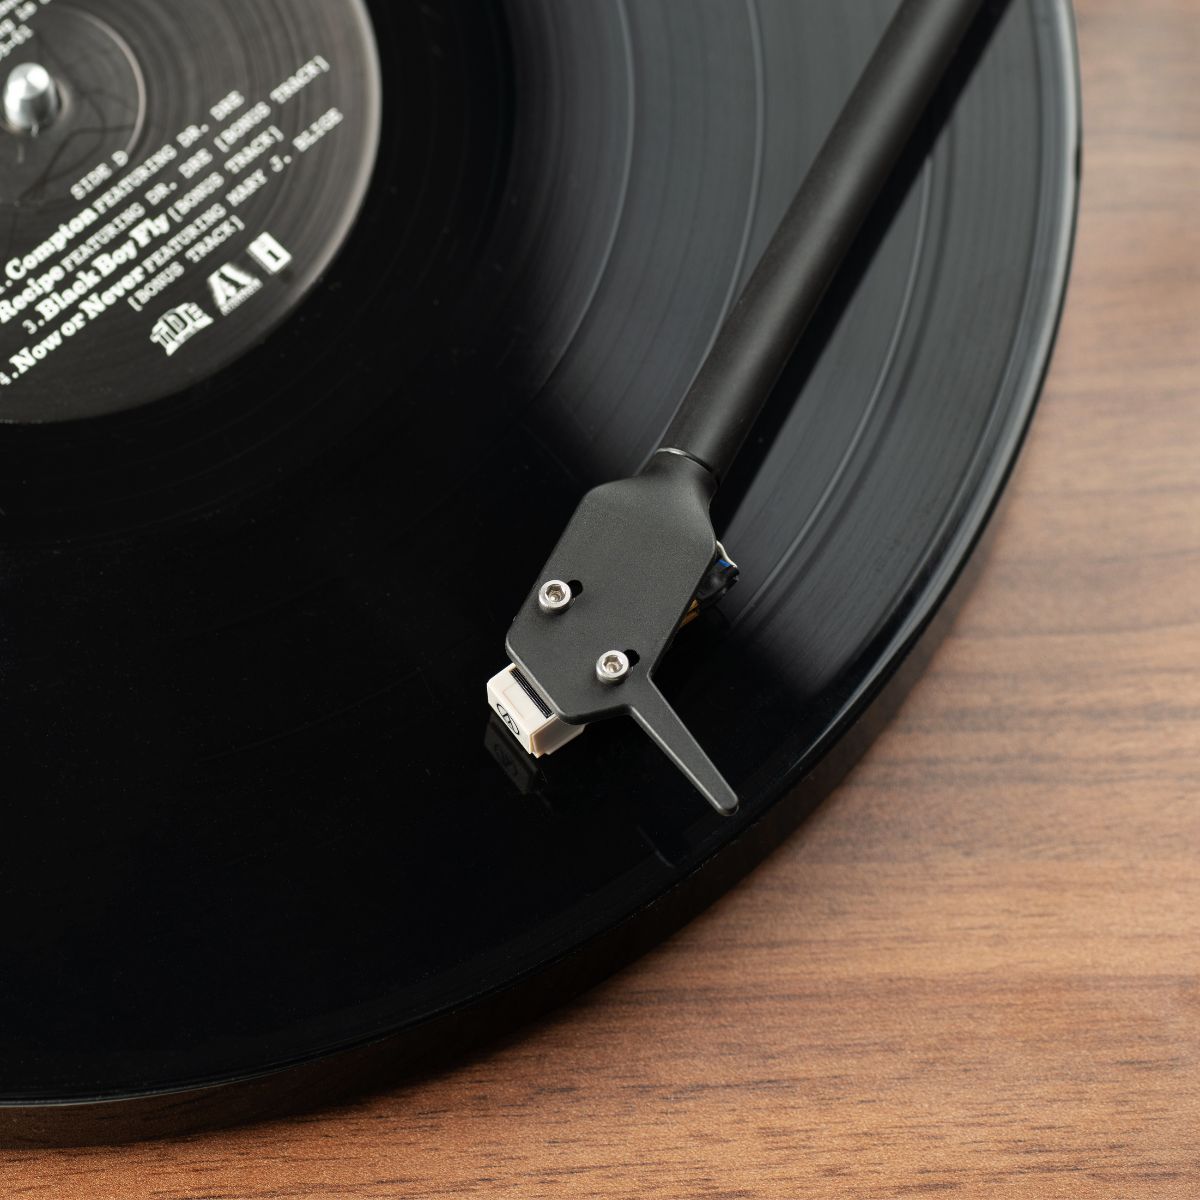 Pro-Ject E1 BT Bluetooth Turntable with Built-In Preamplifier - K&B Audio